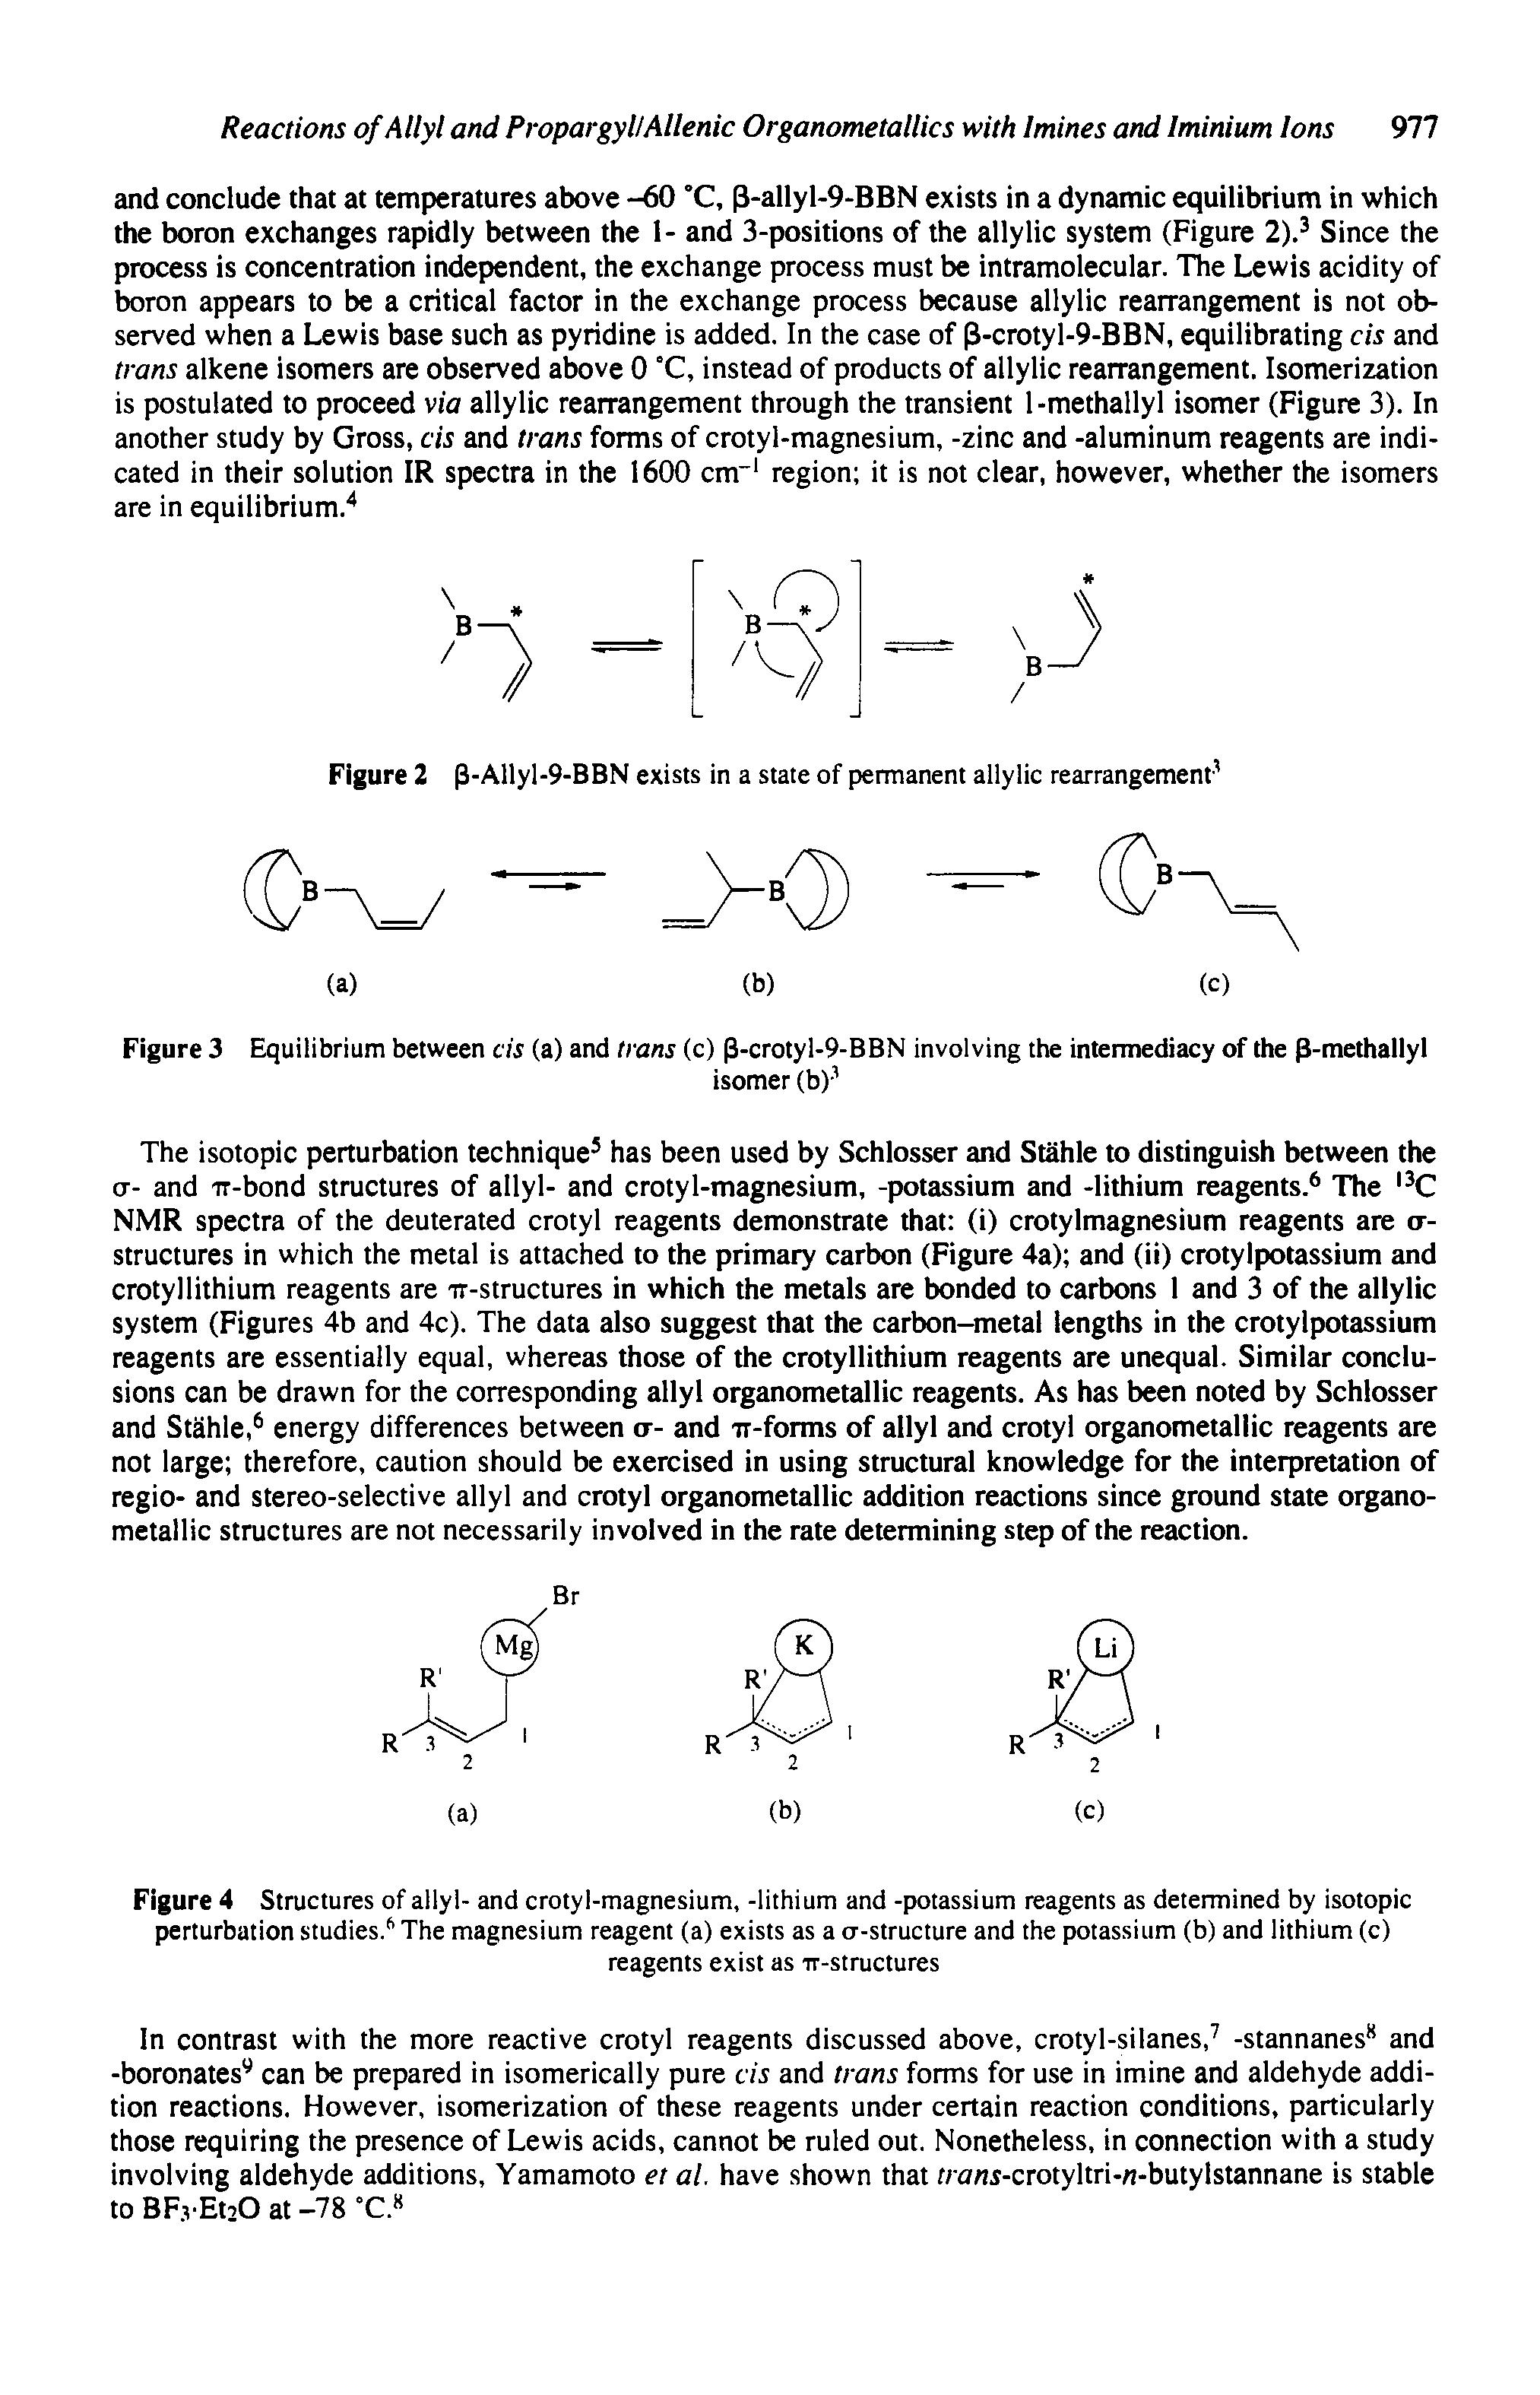 Figure 4 Structures of allyl- and crotyl-magnesium, -lithium and -potassium reagents as determined by isotopic perturbation studies. The magnesium reagent (a) exists as a o-structure and the potassium (b) and lithium (c)...